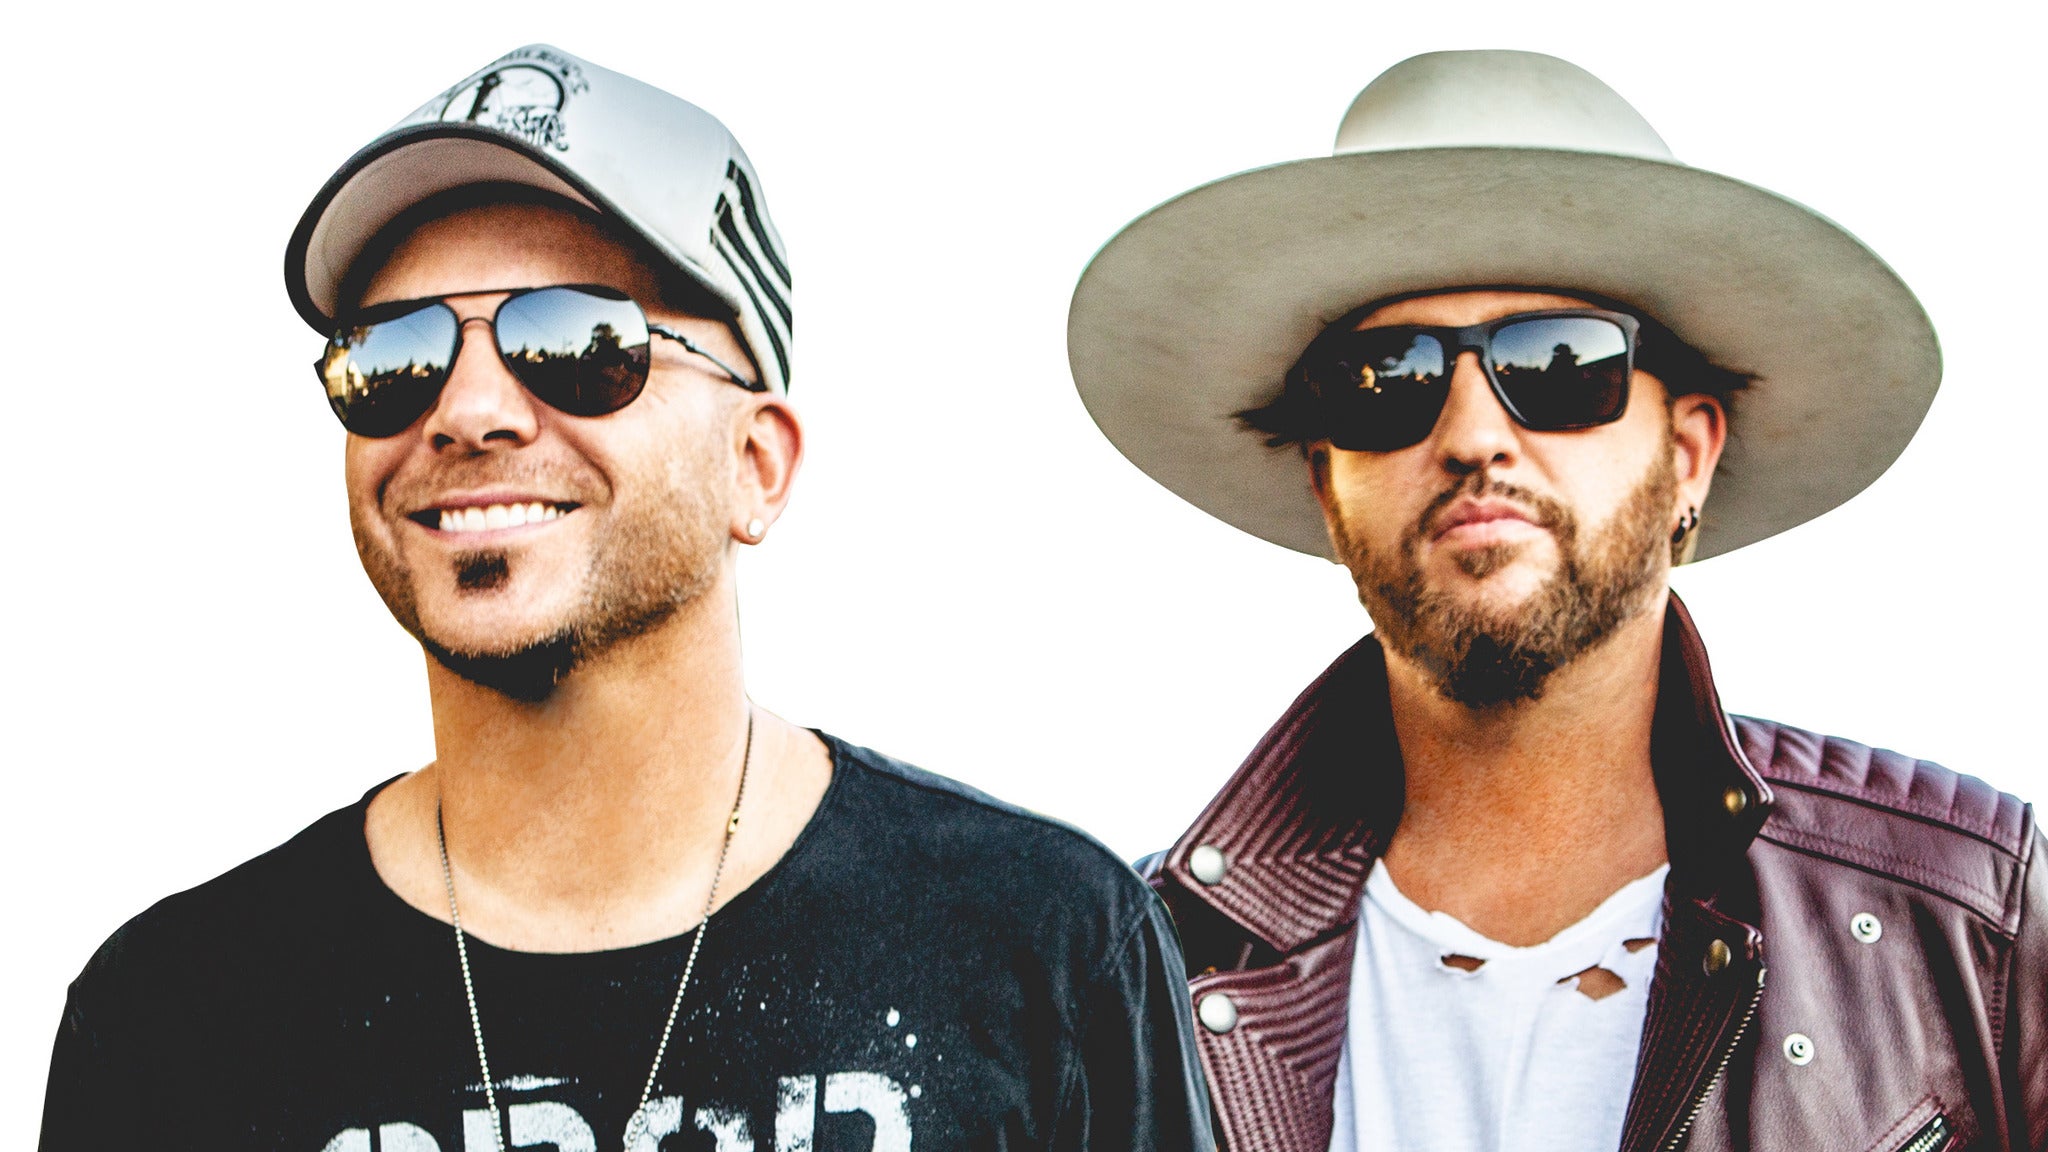 LOCASH in North Myrtle Beach promo photo for Live Nation Mobile App presale offer code